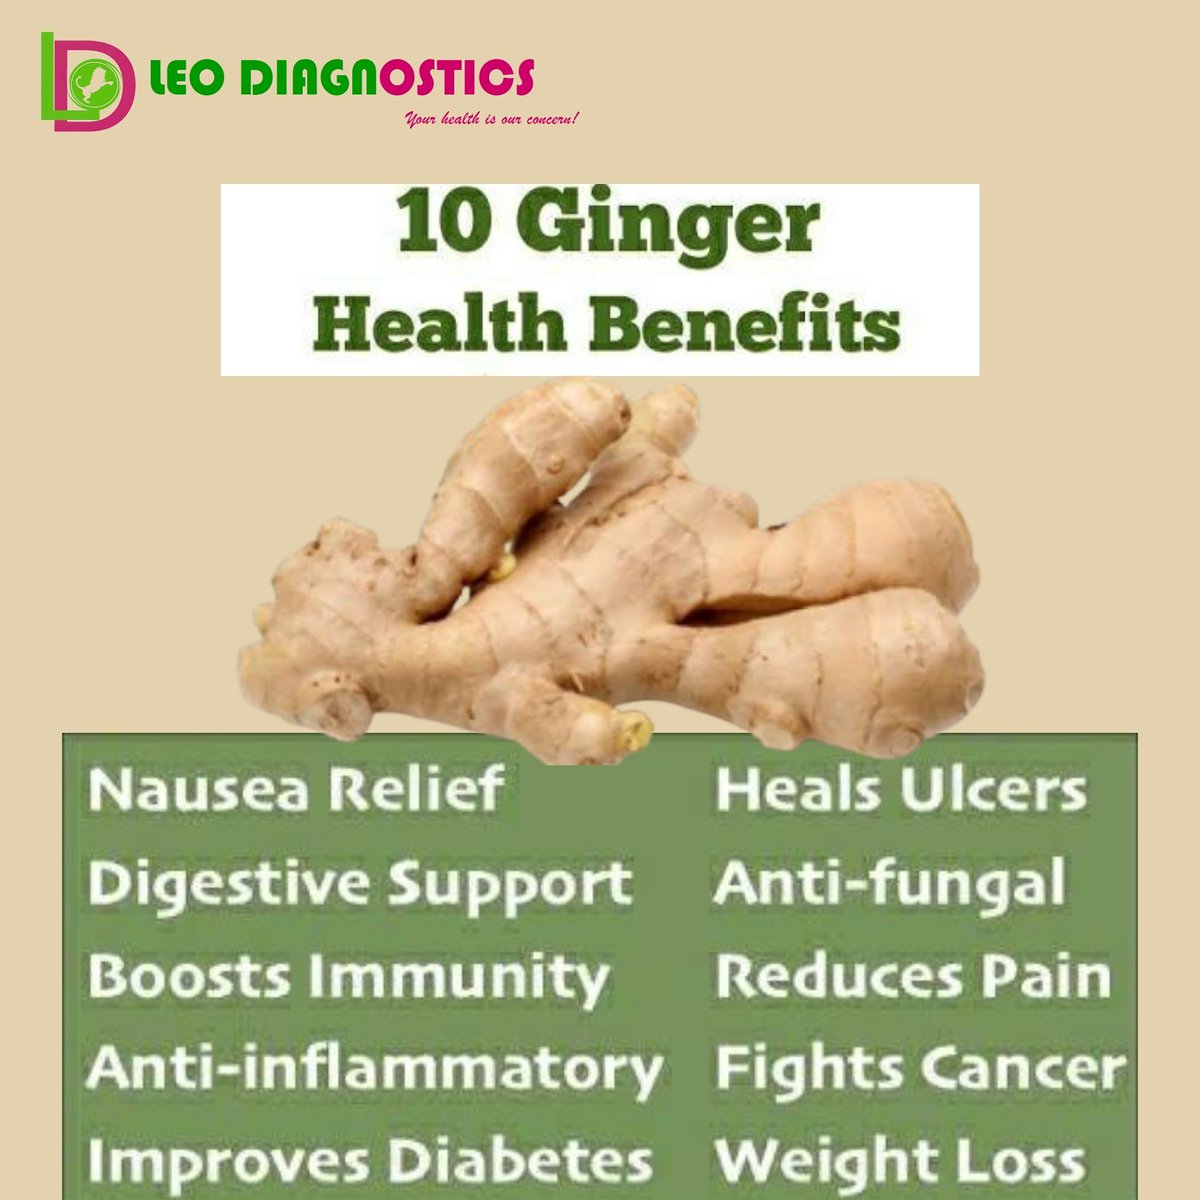 Ginger is a popular spice with powerful medicinal properties.
#gingerbenefits #factsabouthealth #healthfacts101 #anixetyhelp #healthinfluencers #dailyhealthtips #healthtipsdaily #goodforhealth #monsoonhealthhacks #healthyyoutips #healthylifestyle #gingerteabenefits #gingeruses